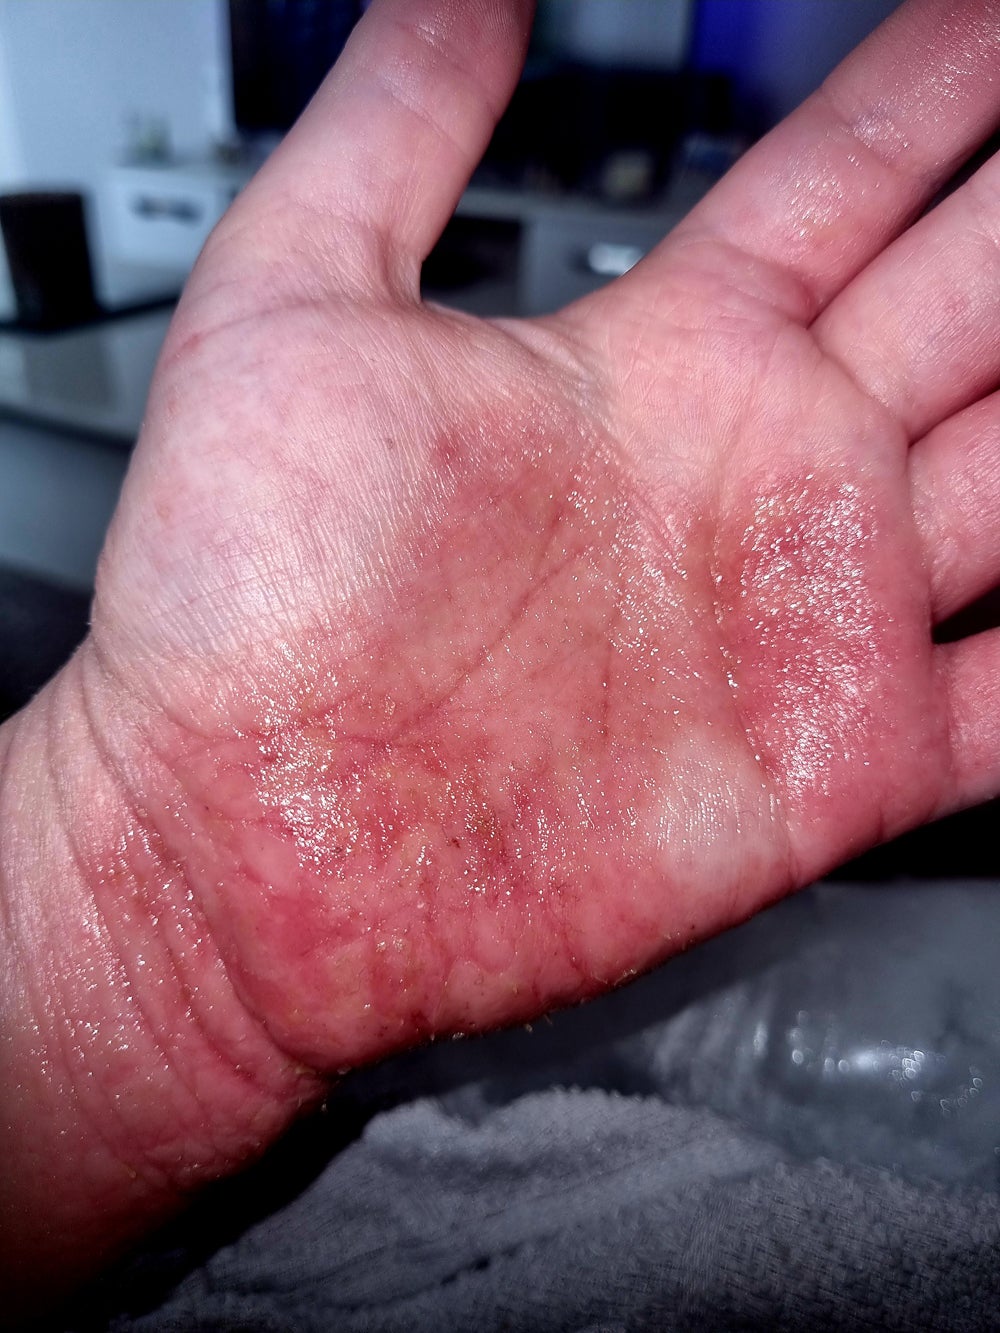 Kimberley’s hand raw and peeling earlier this year, in April 2022 (Collect/PA Real Life)